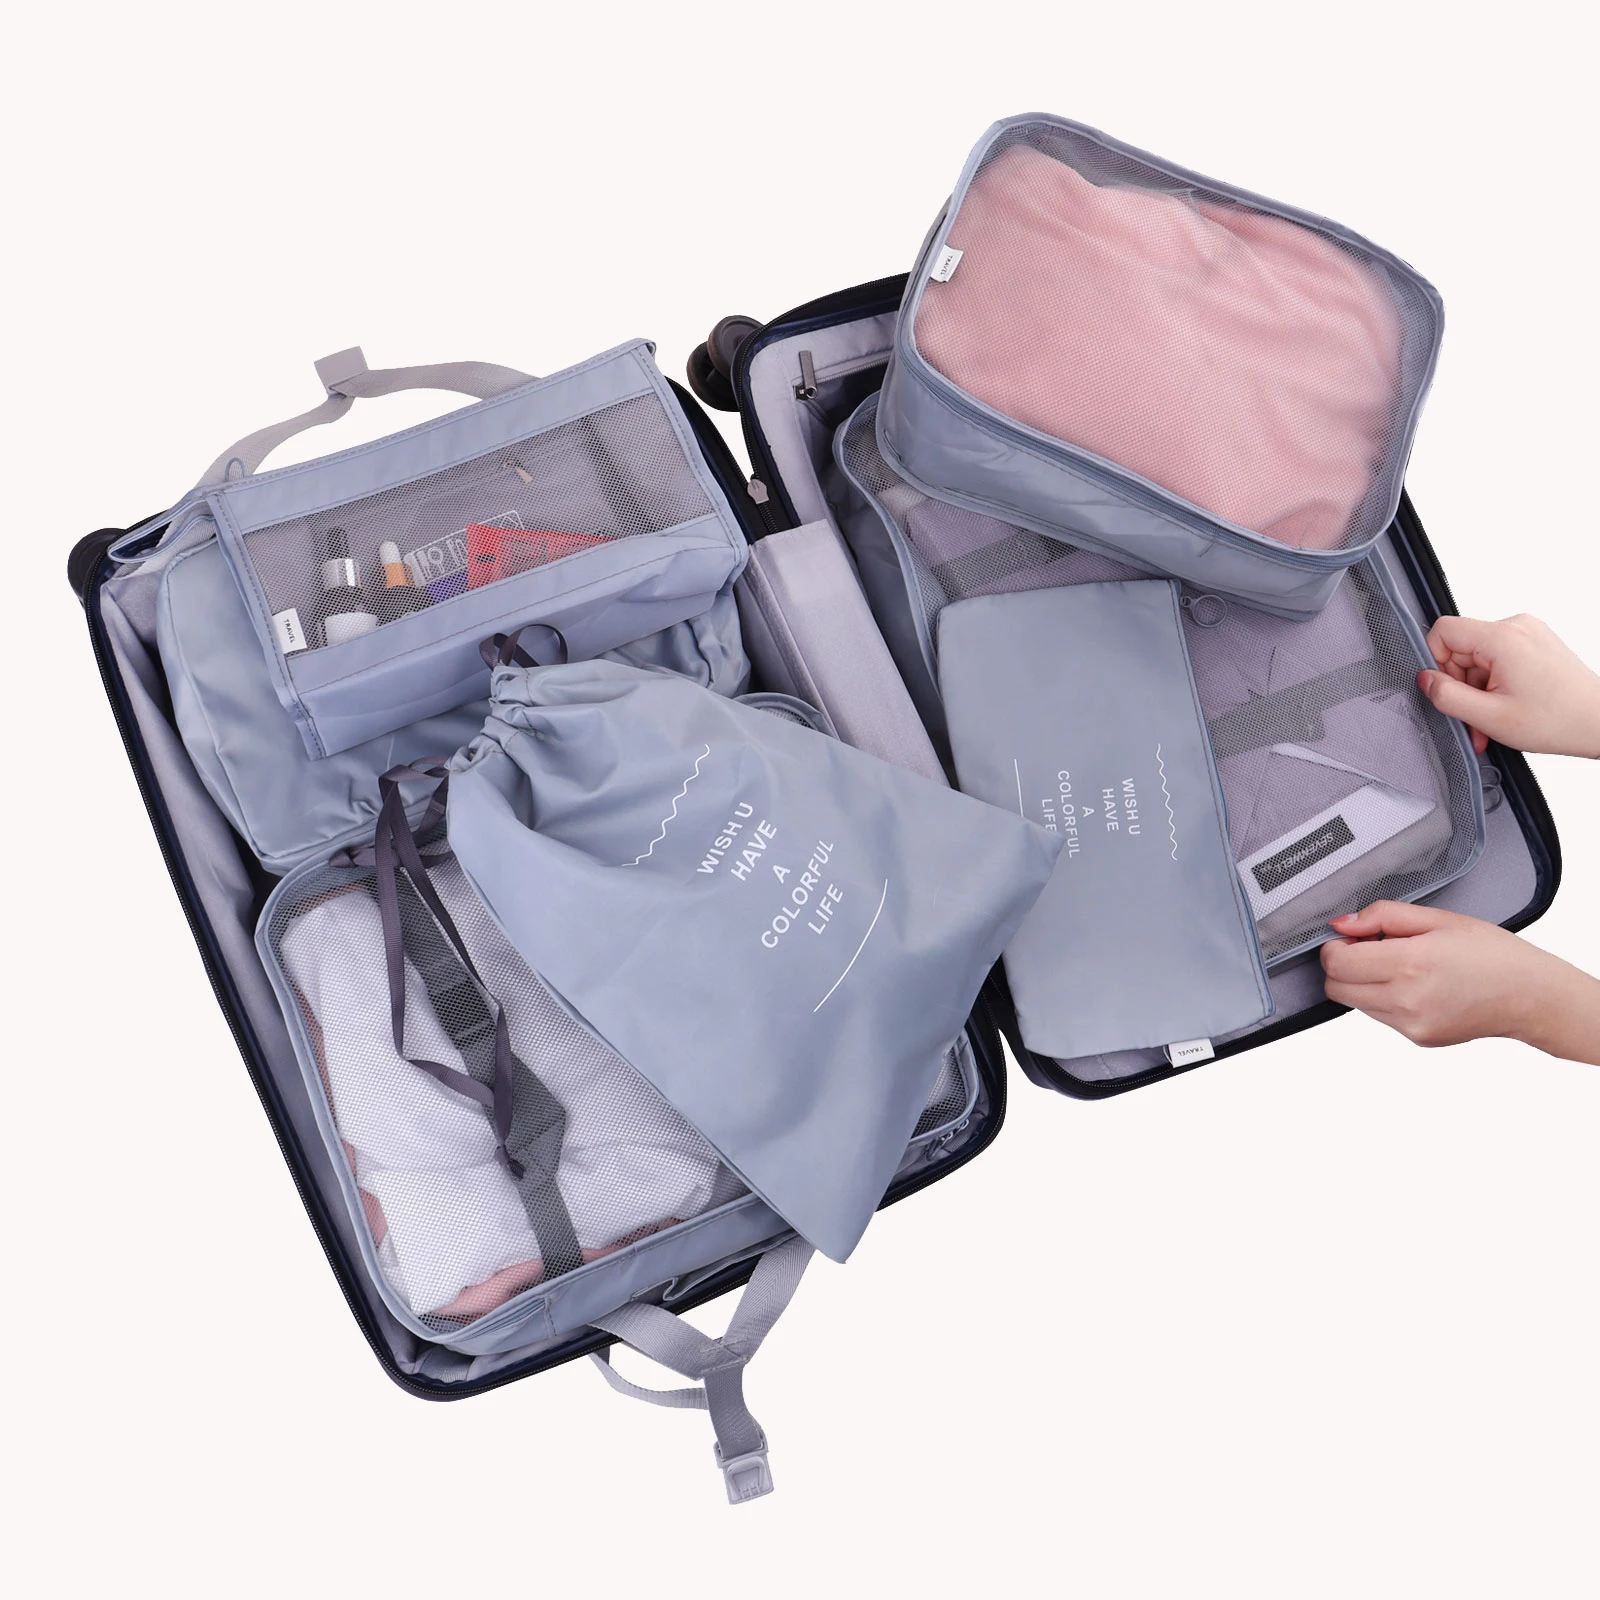 6/4 PCS Travel Storage Bag Set For Clothes Tidy Organizer Wardrobe Suitcase Pouch Travel Organizer Case Shoes Packing Cube Bag